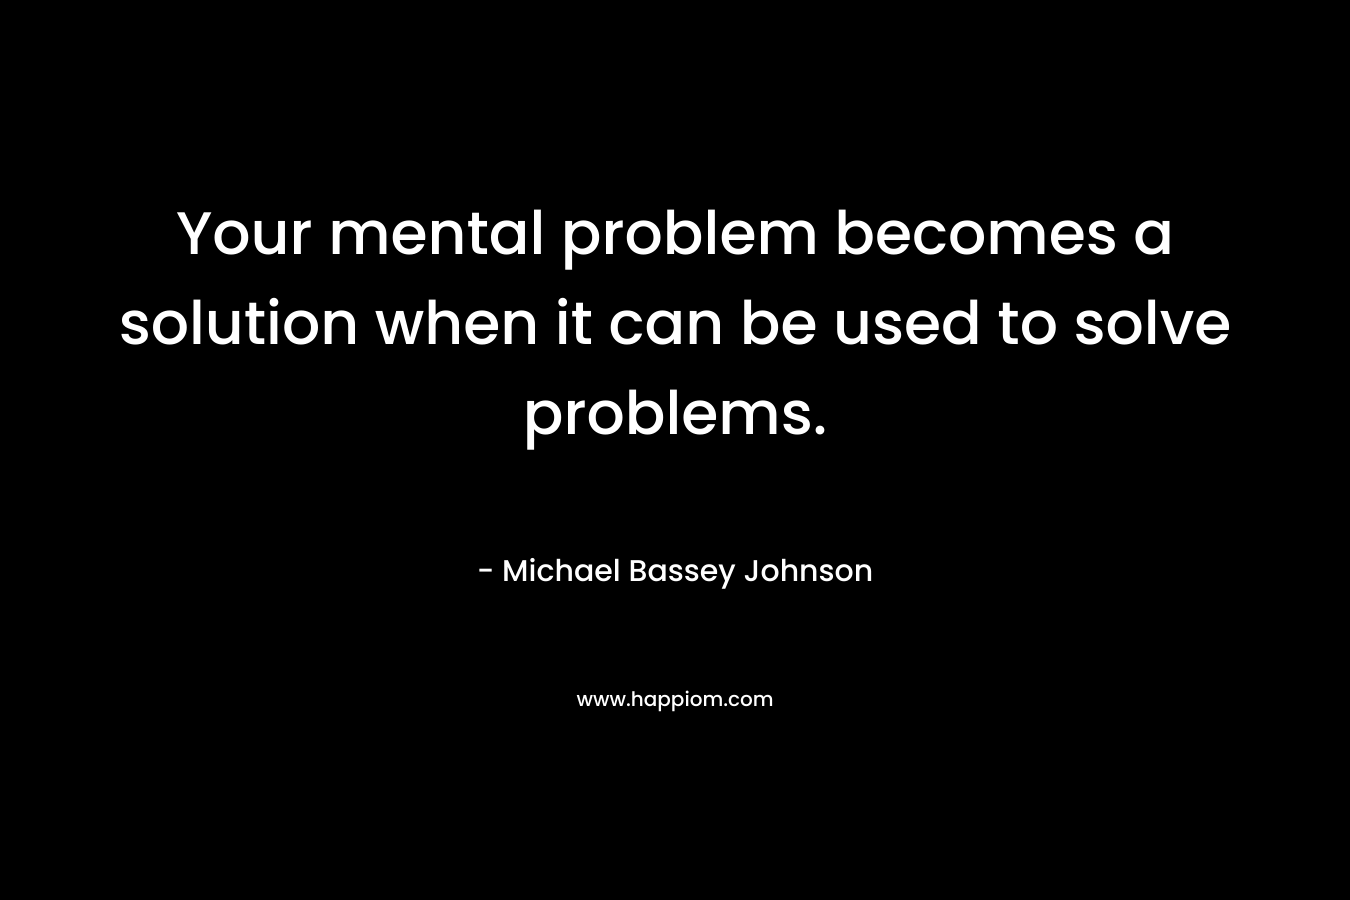 Your mental problem becomes a solution when it can be used to solve problems.